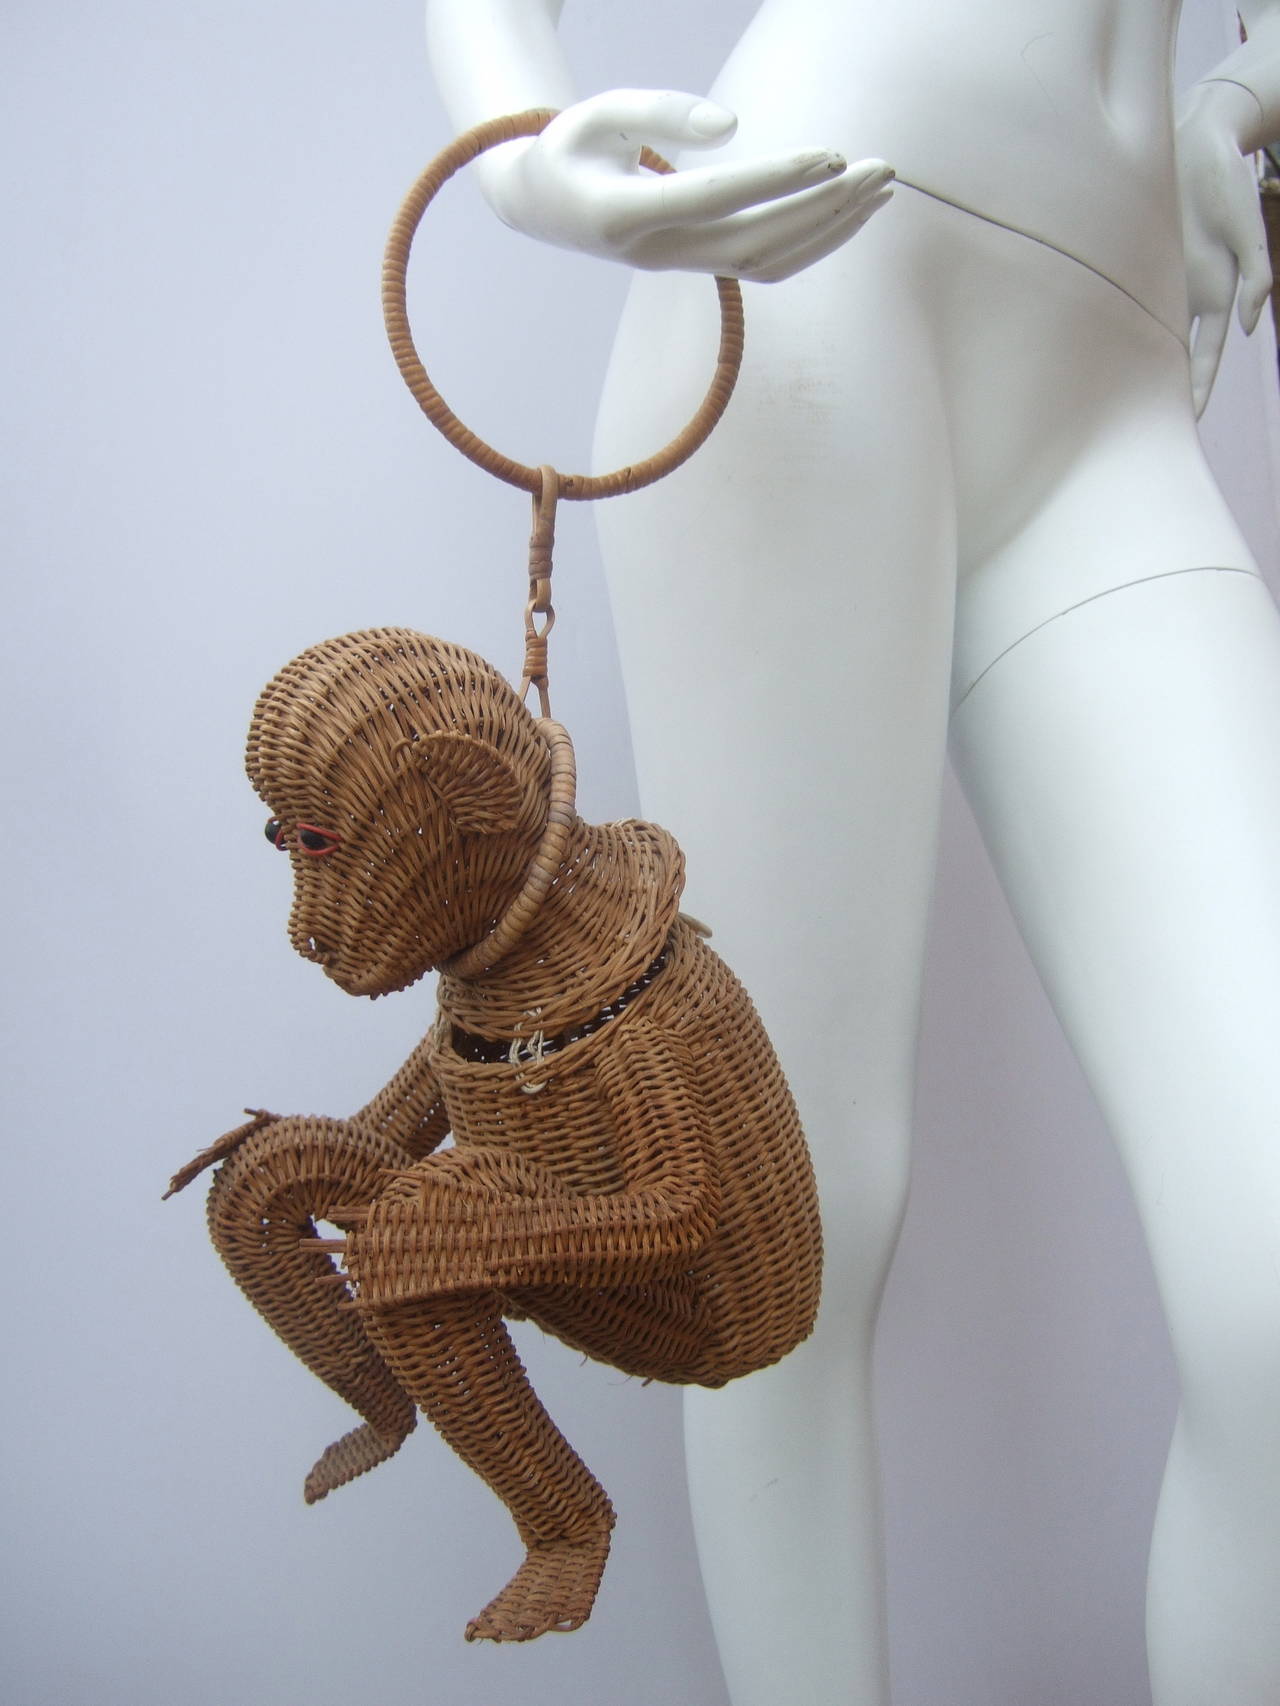 Whimsical wicker handmade monkey handbag c 1960
The unique retro handbag is designed in the shape of a monkey figure
The little guy is accented with black wood beaded expressive eyes
The avant-garde handbag hangs from an attached round hoop